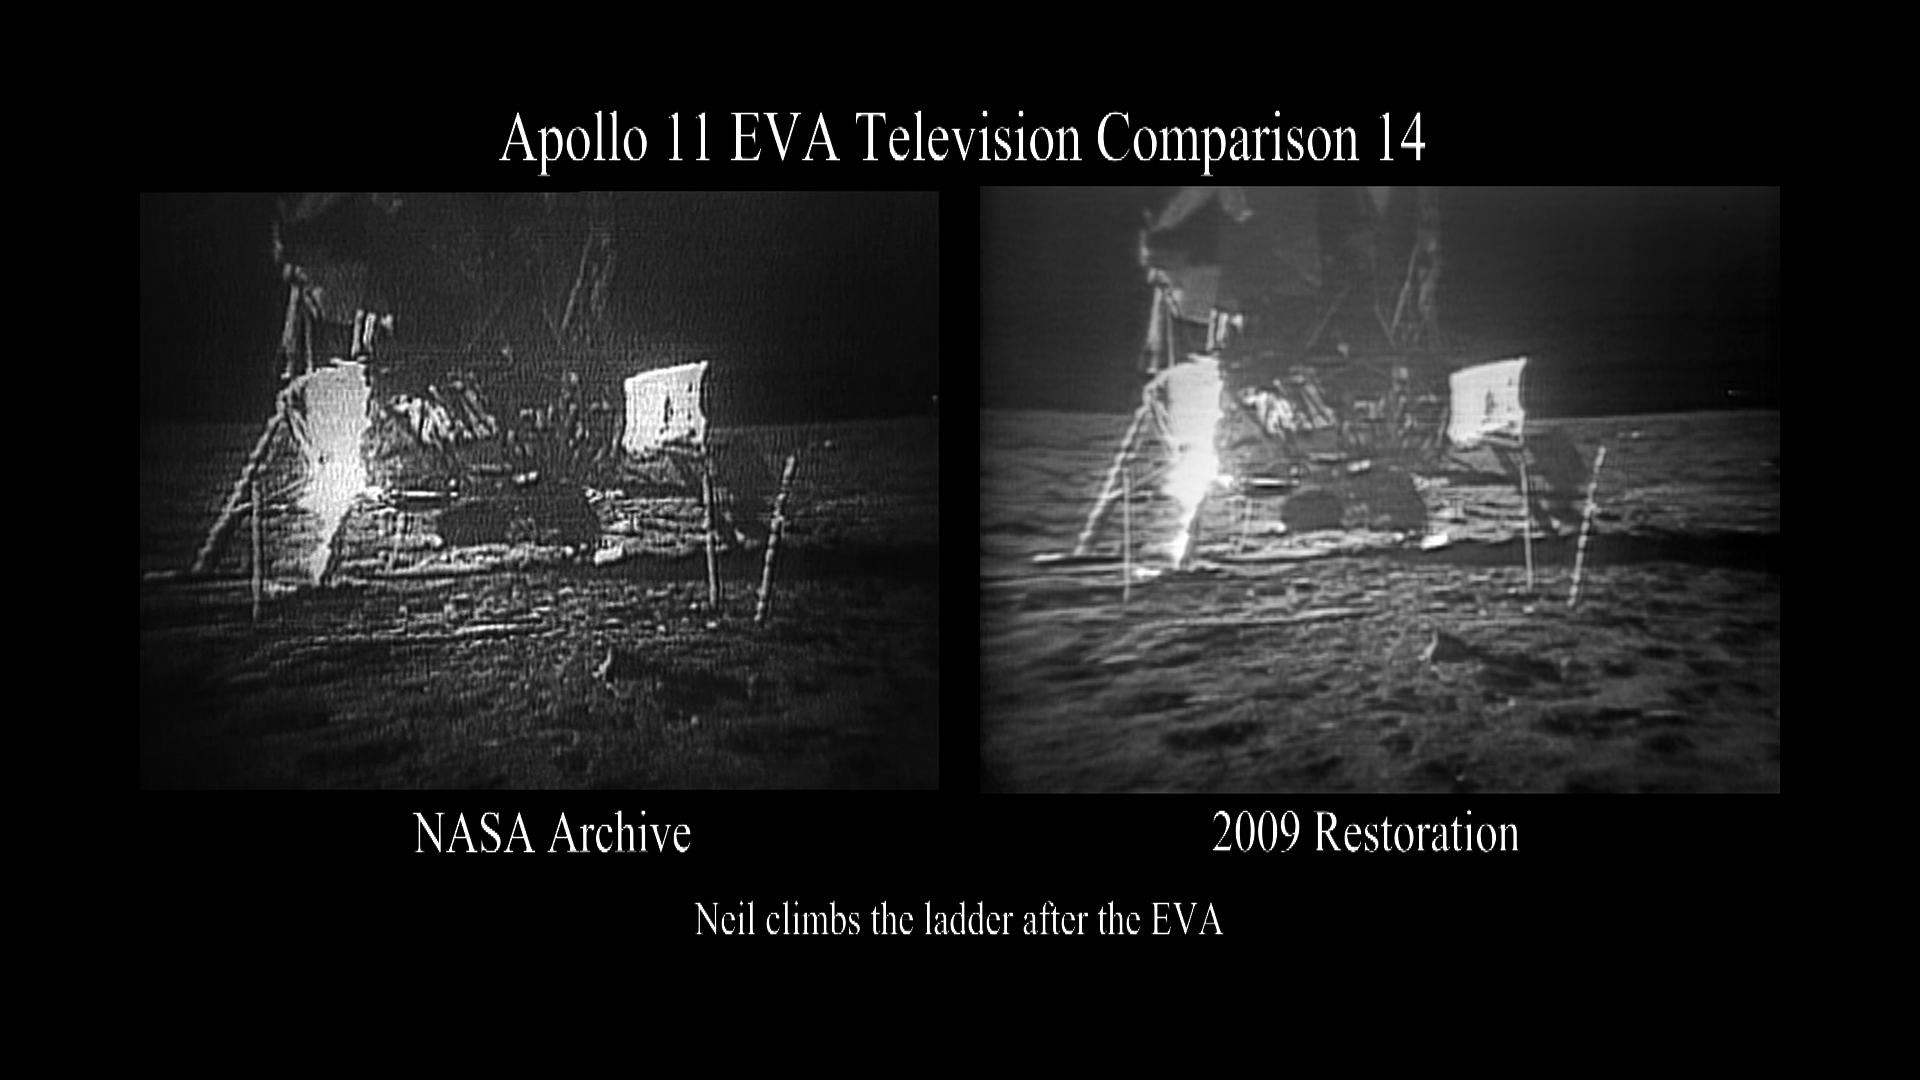 A side by side comparison of the original broadcast video and partially restored video of Neil Armstrong climbing the ladder after the three hour EVA.